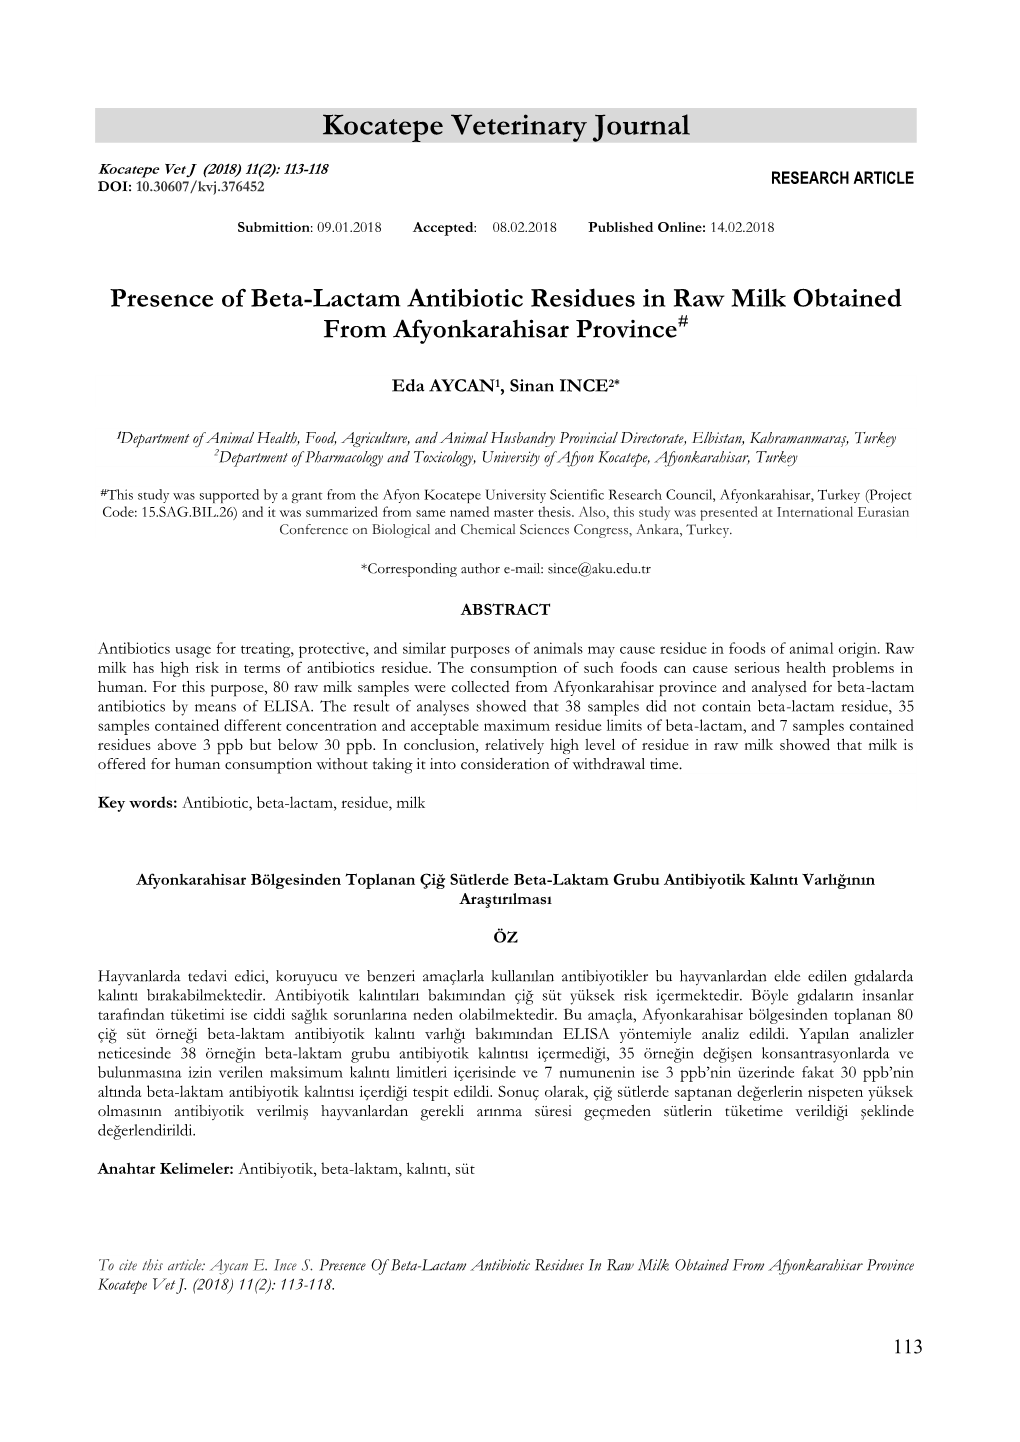 Presence of Beta-Lactam Antibiotic Residues in Raw Milk Obtained from Afyonkarahisar Province